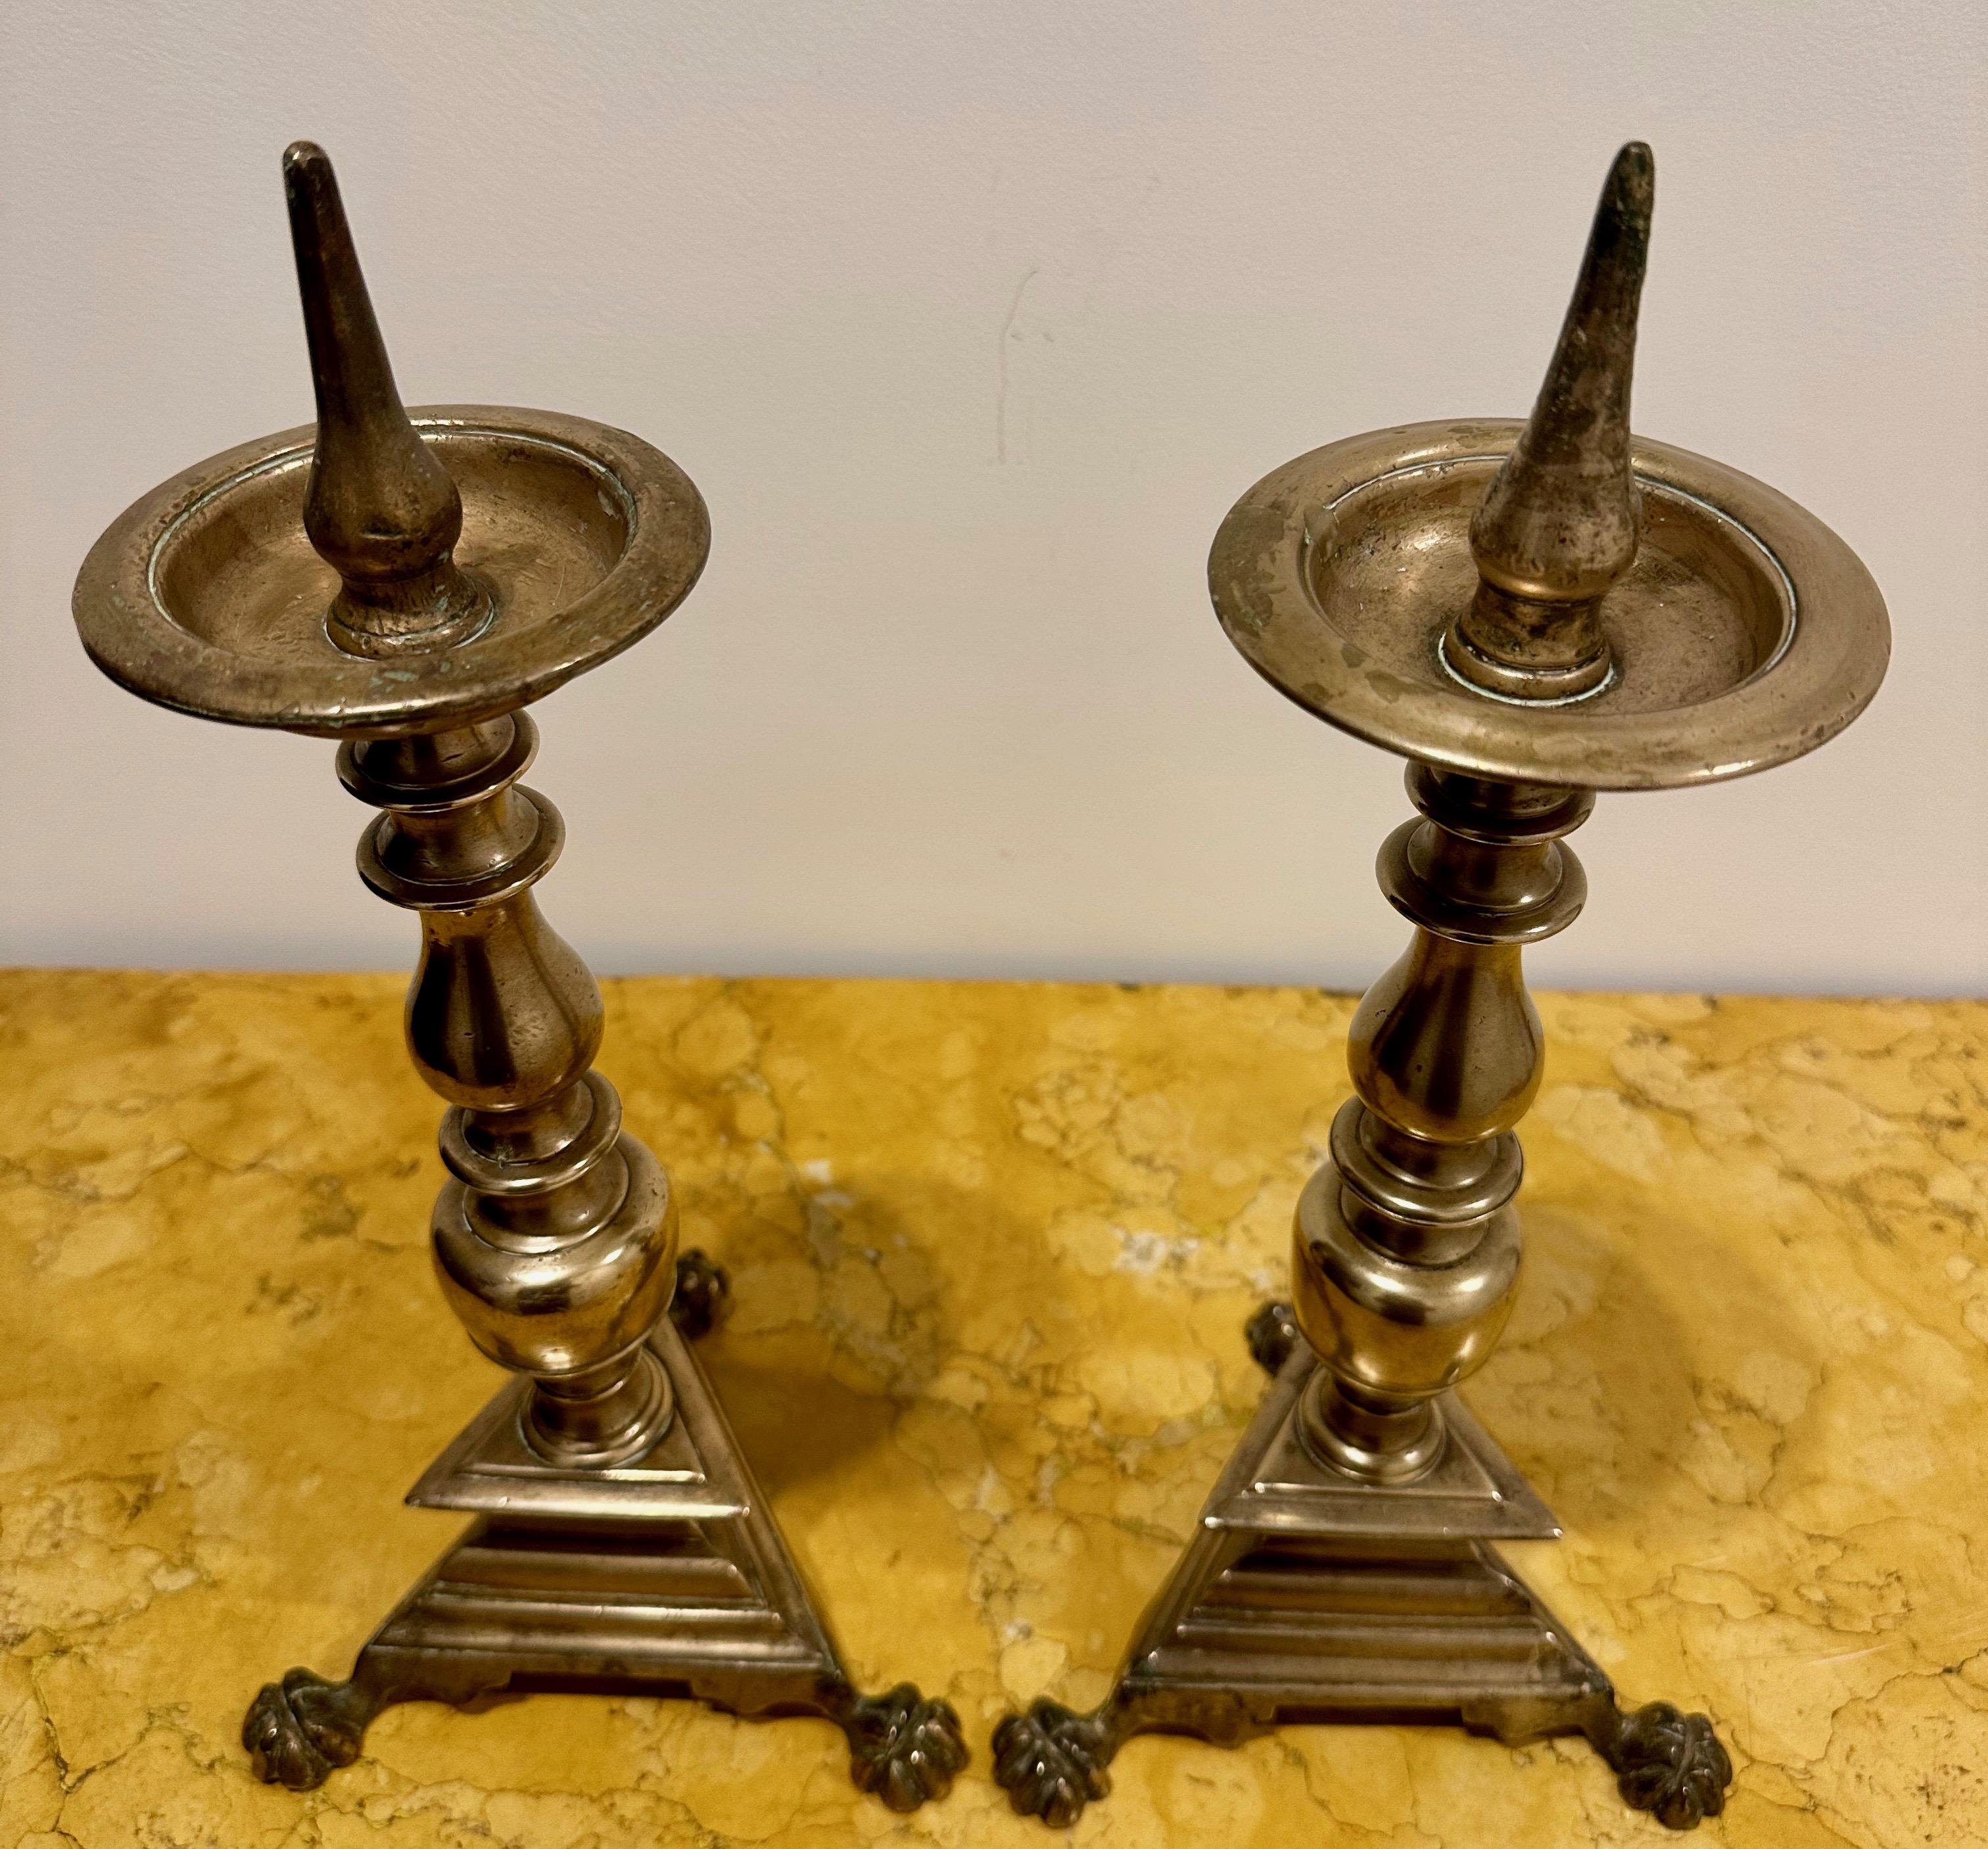 Italian Baroque, Pair of Bronze Pricked Candlesticks, 17th Century For Sale 1